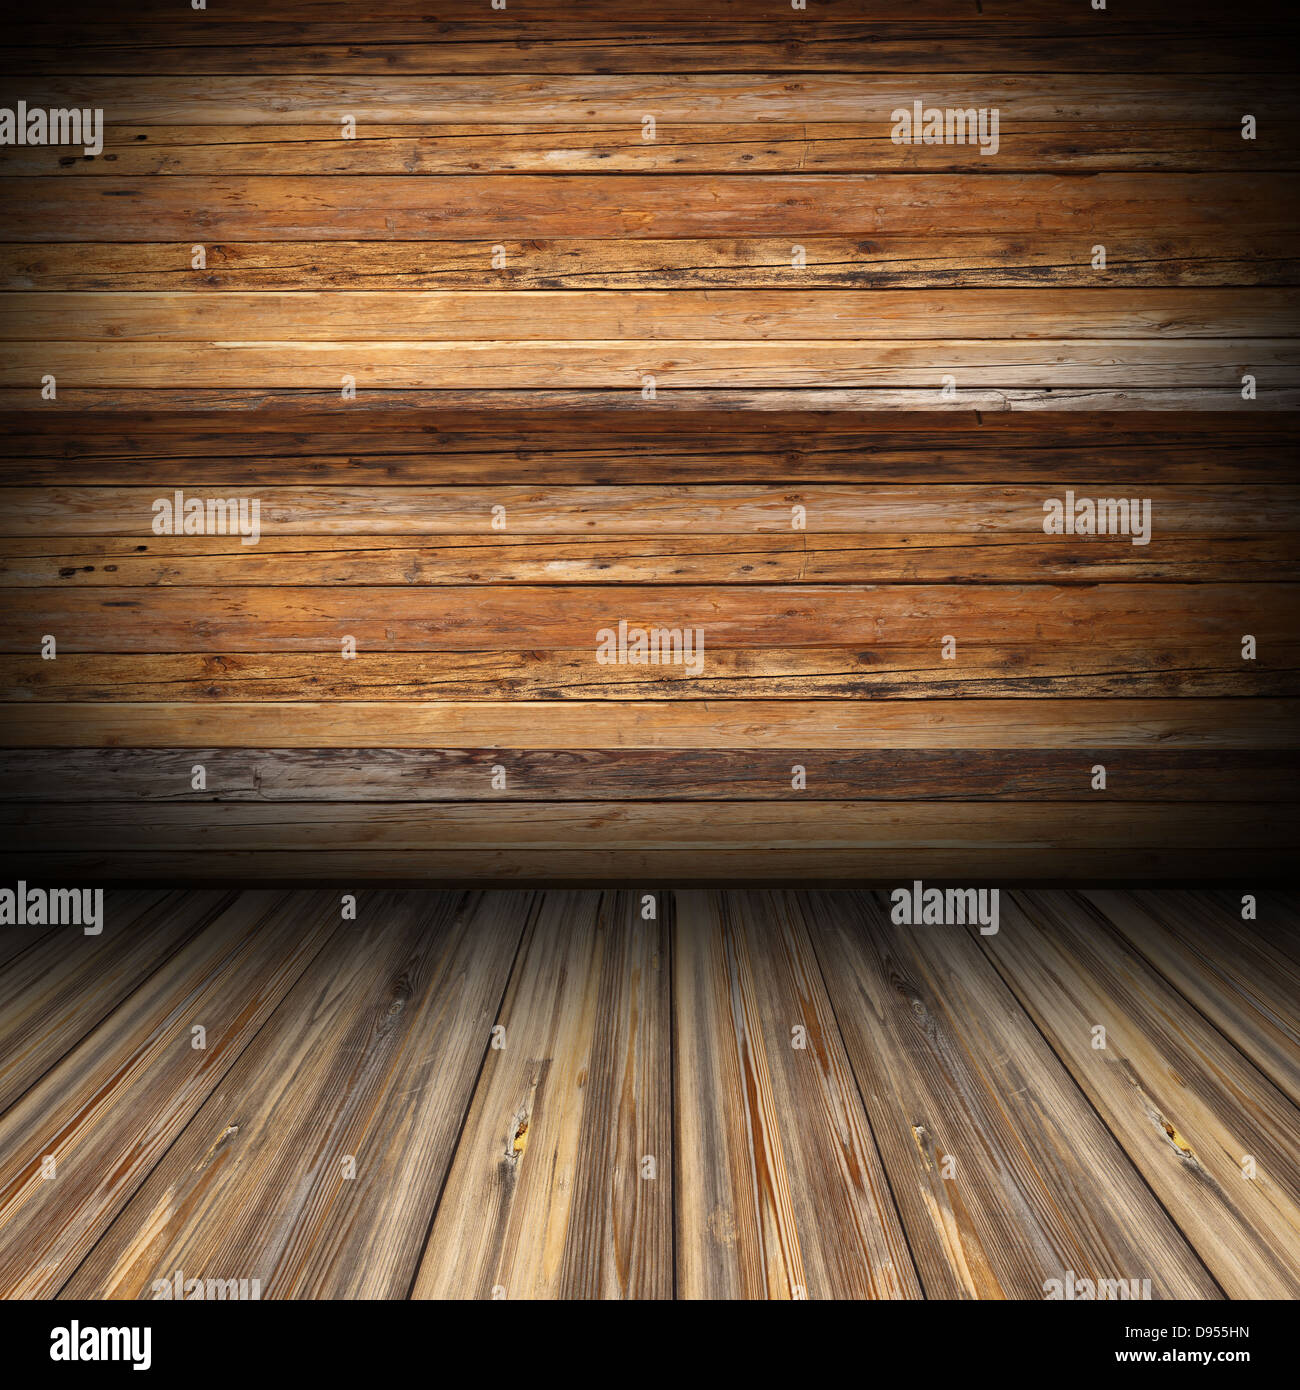 blank architectural interior ready for your design - wooden floor and panel wall Stock Photo